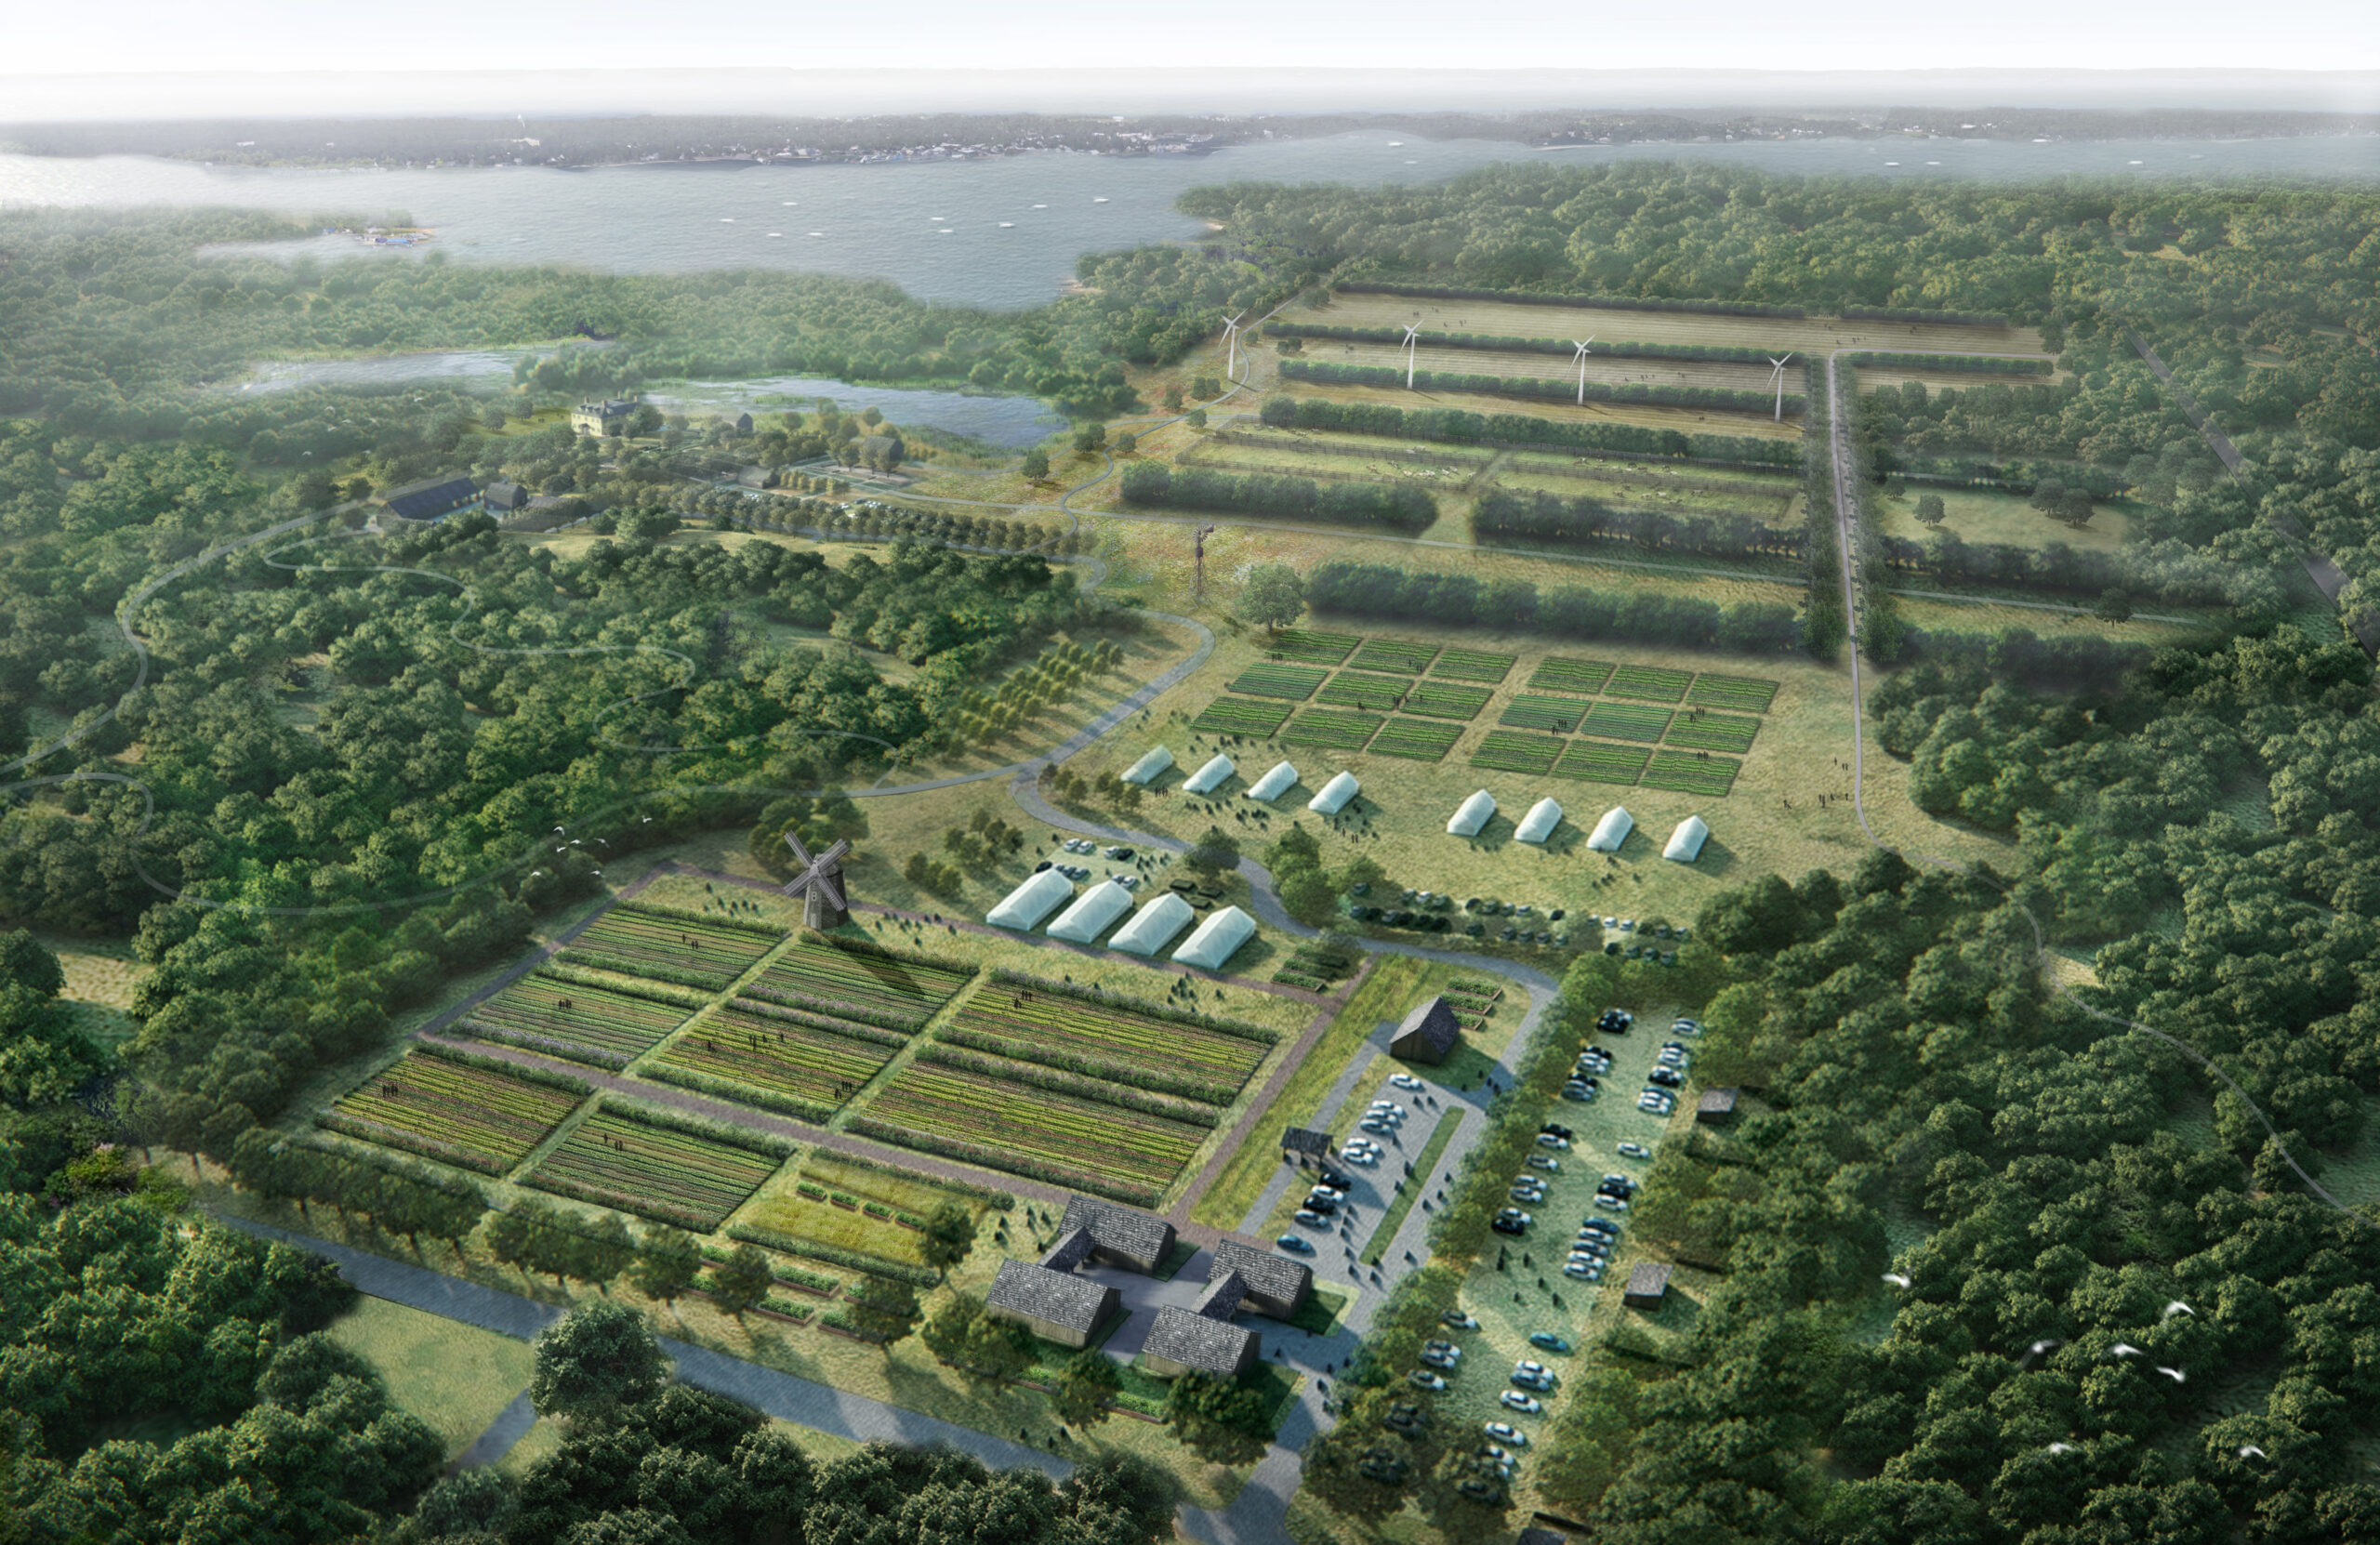 Sylvester Manor Educational Farm rendering by Nelson Byrd Woltz Landscape Architects.